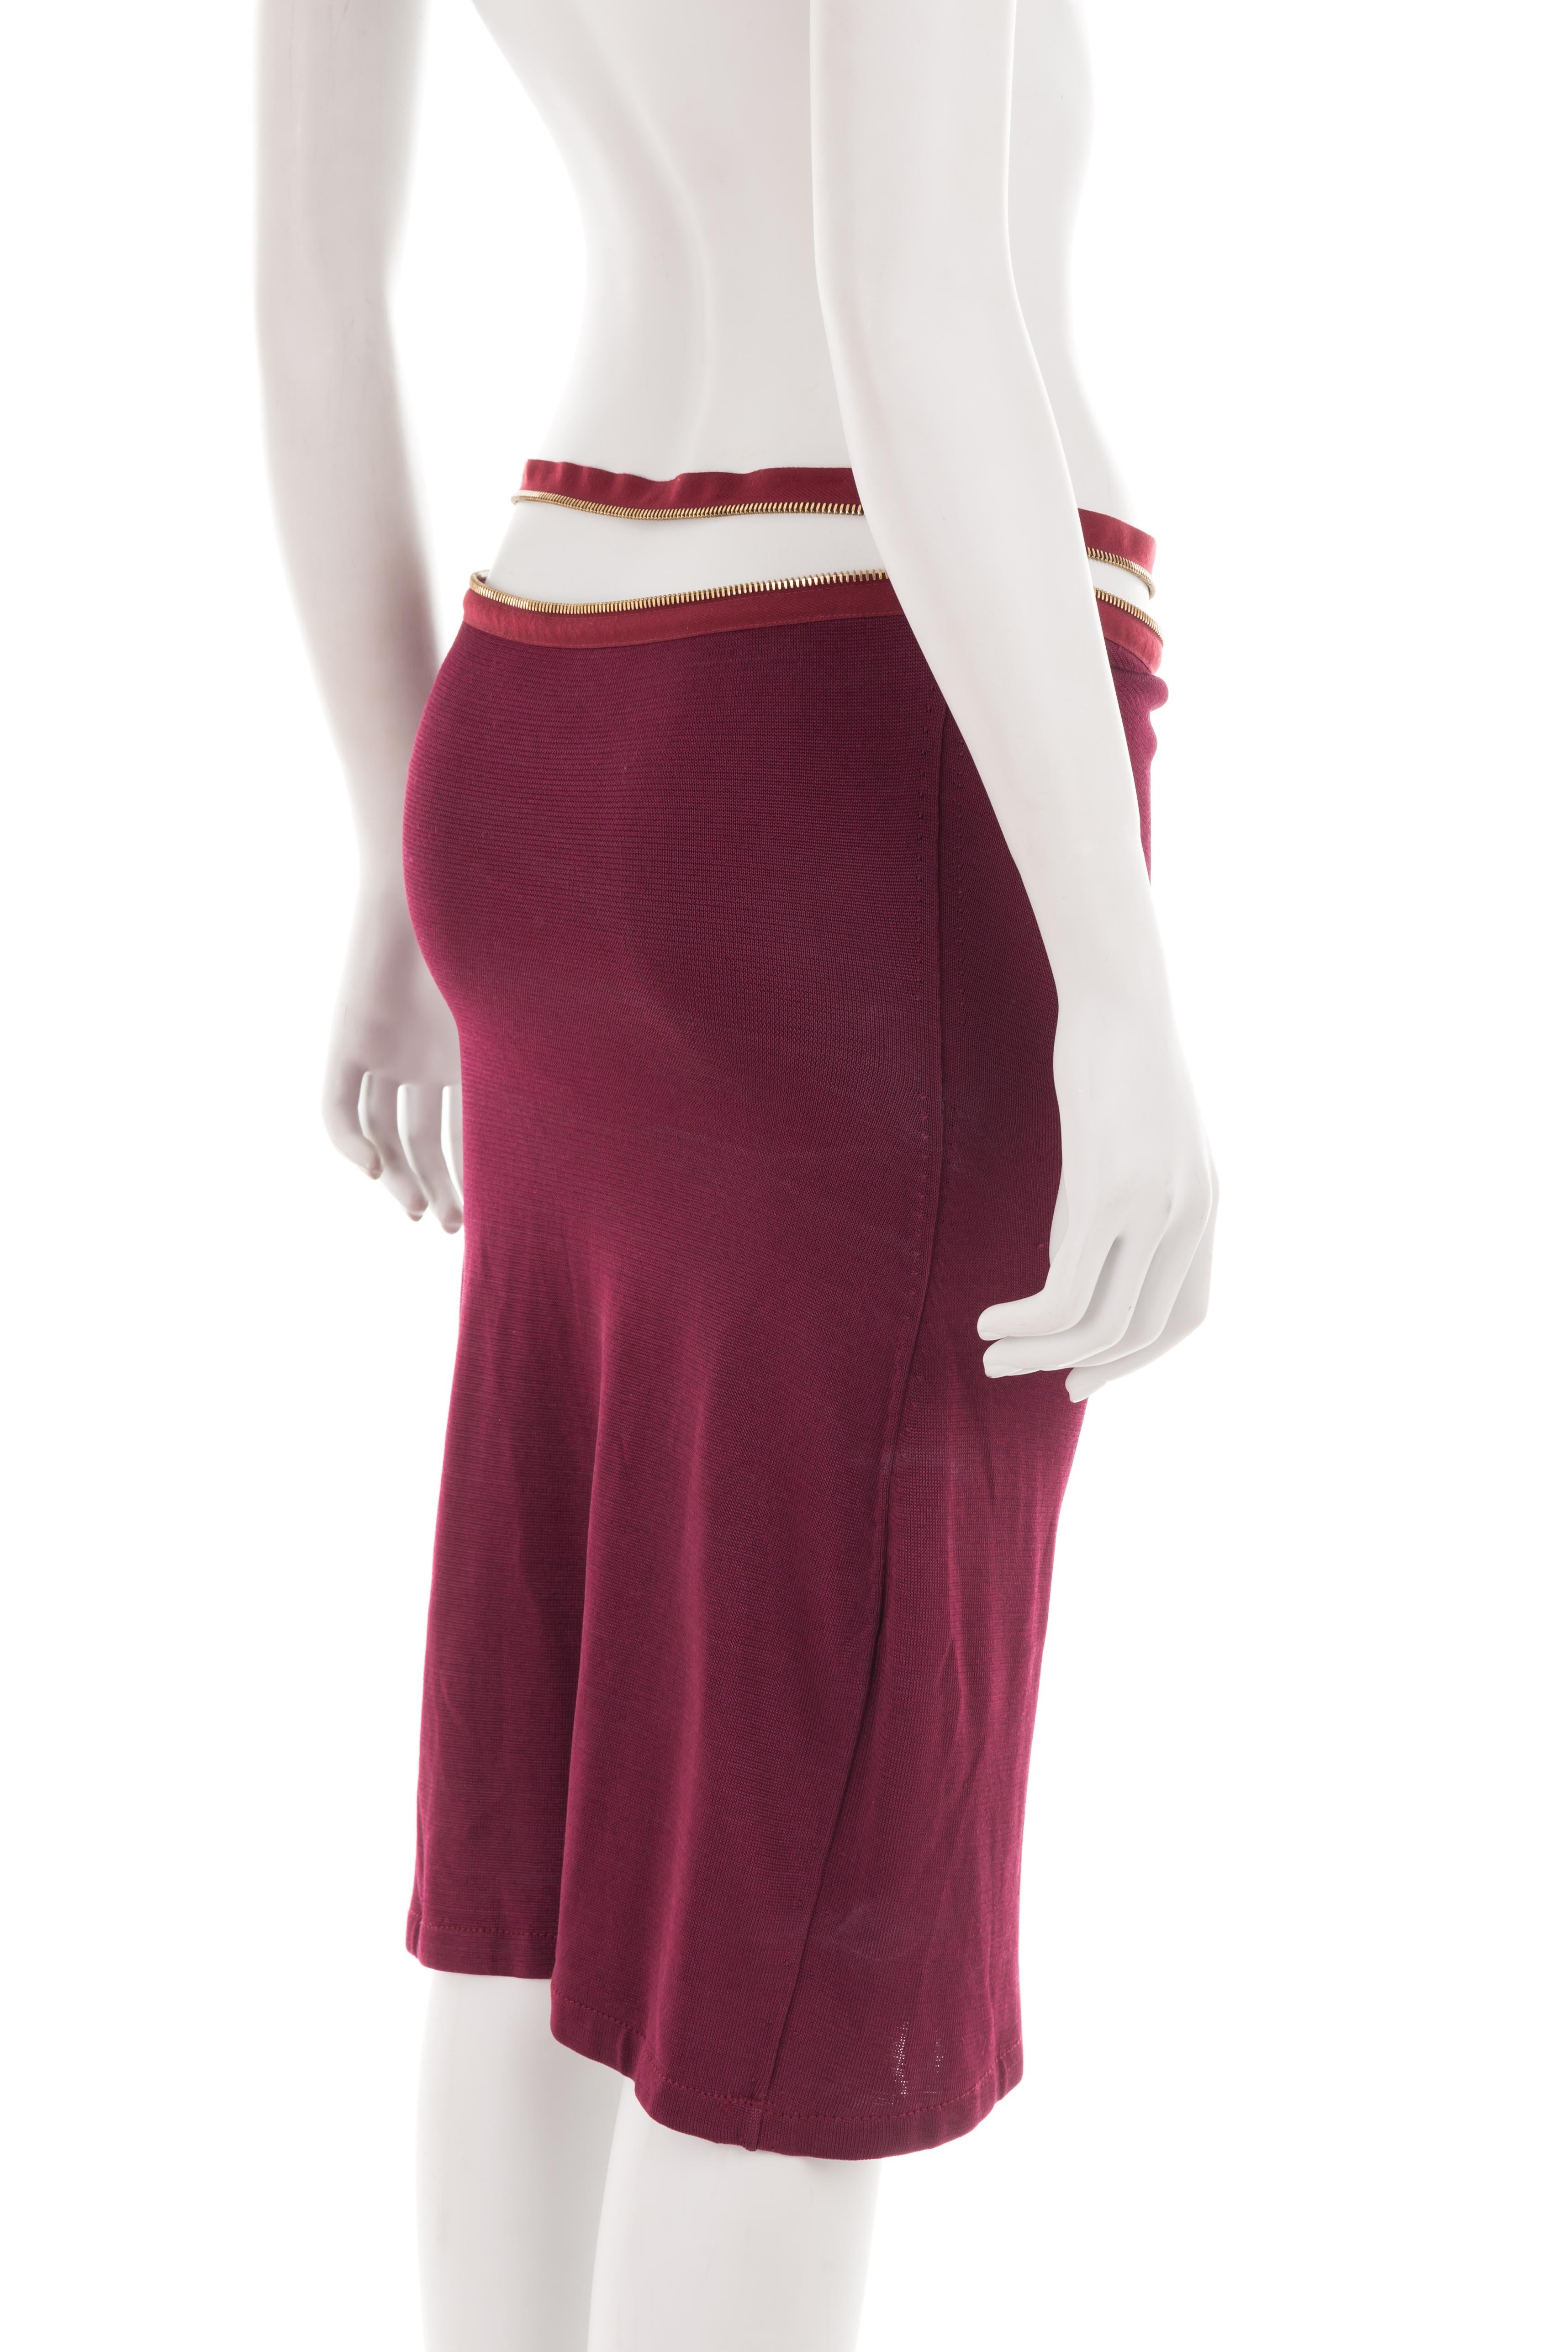 Christian Dior S/S 2001 burgundy midi skirt with asymmetric logo zippers In Excellent Condition For Sale In Rome, IT